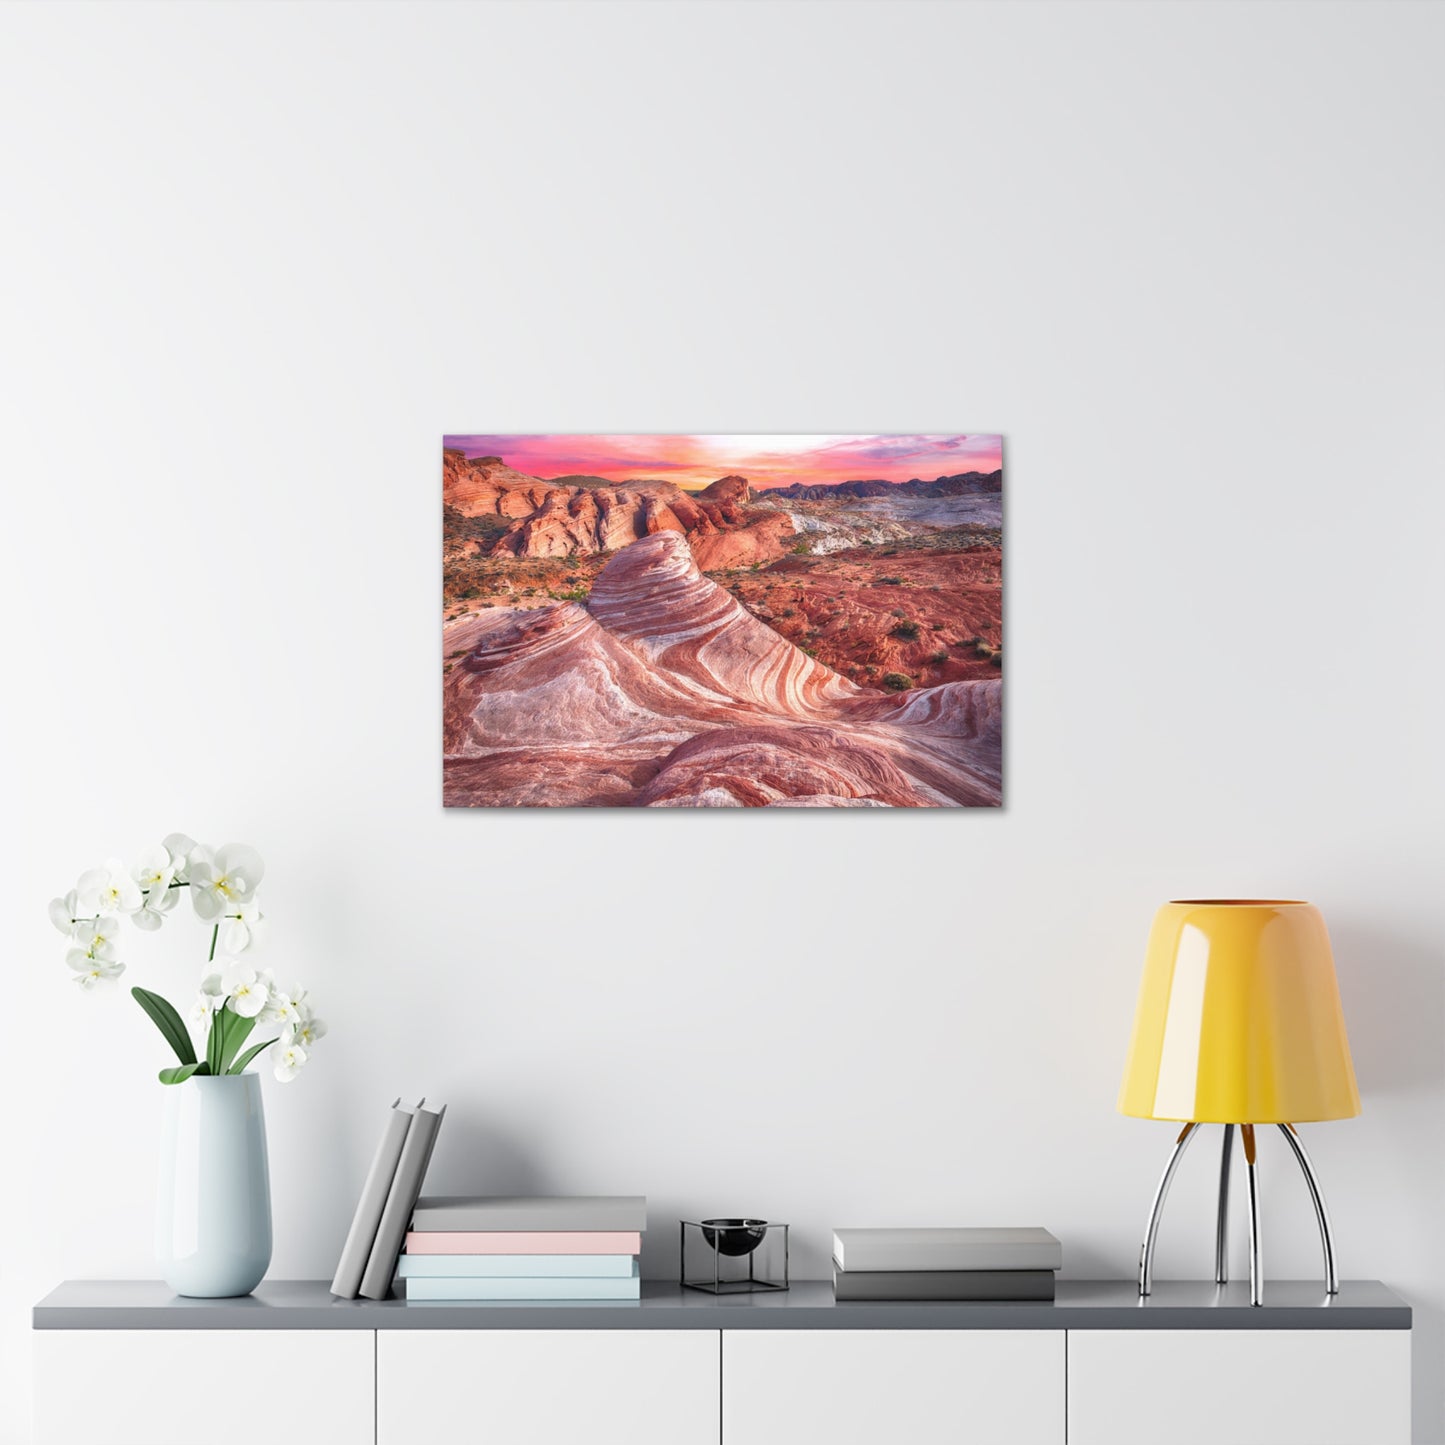 Valley of Fire Wave Rock Canvas Gallery Wraps